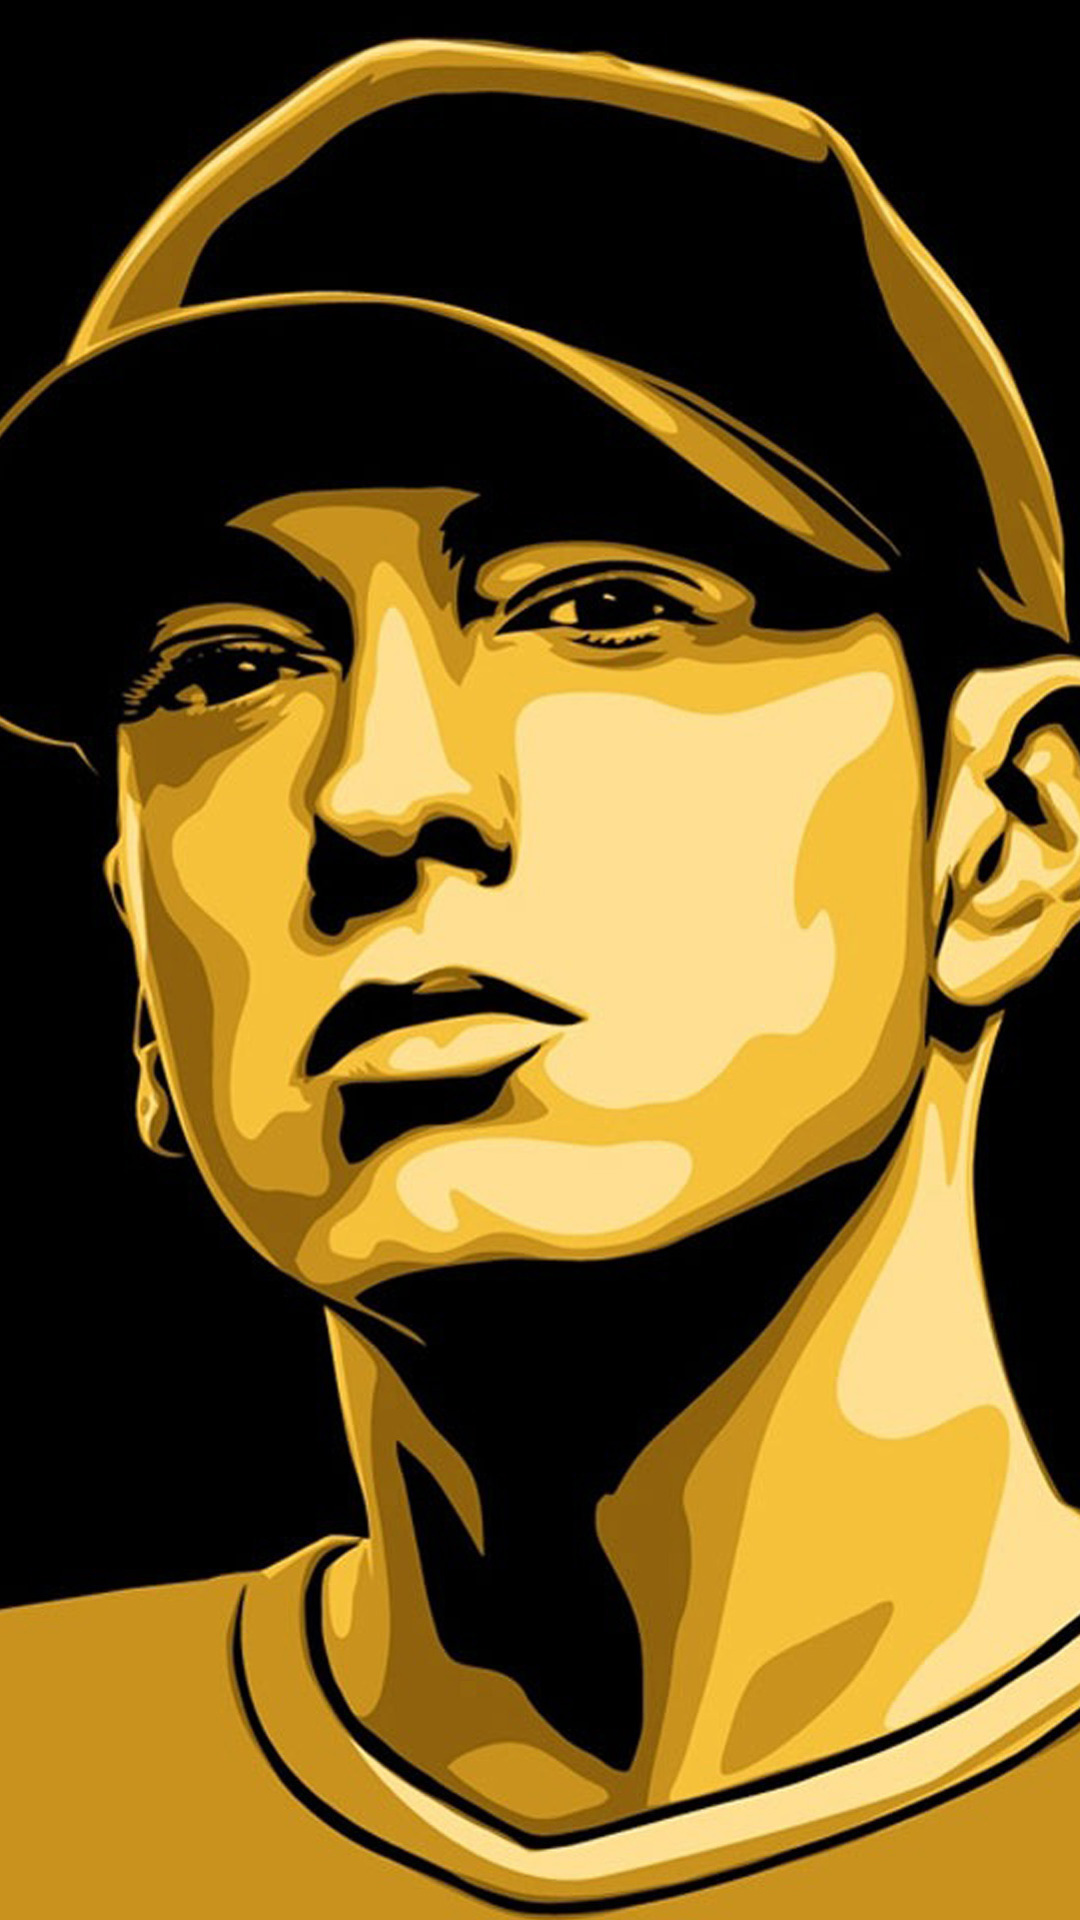 22+] Eminem HD Wallpapers For Mobile Devices - WallpaperSafari